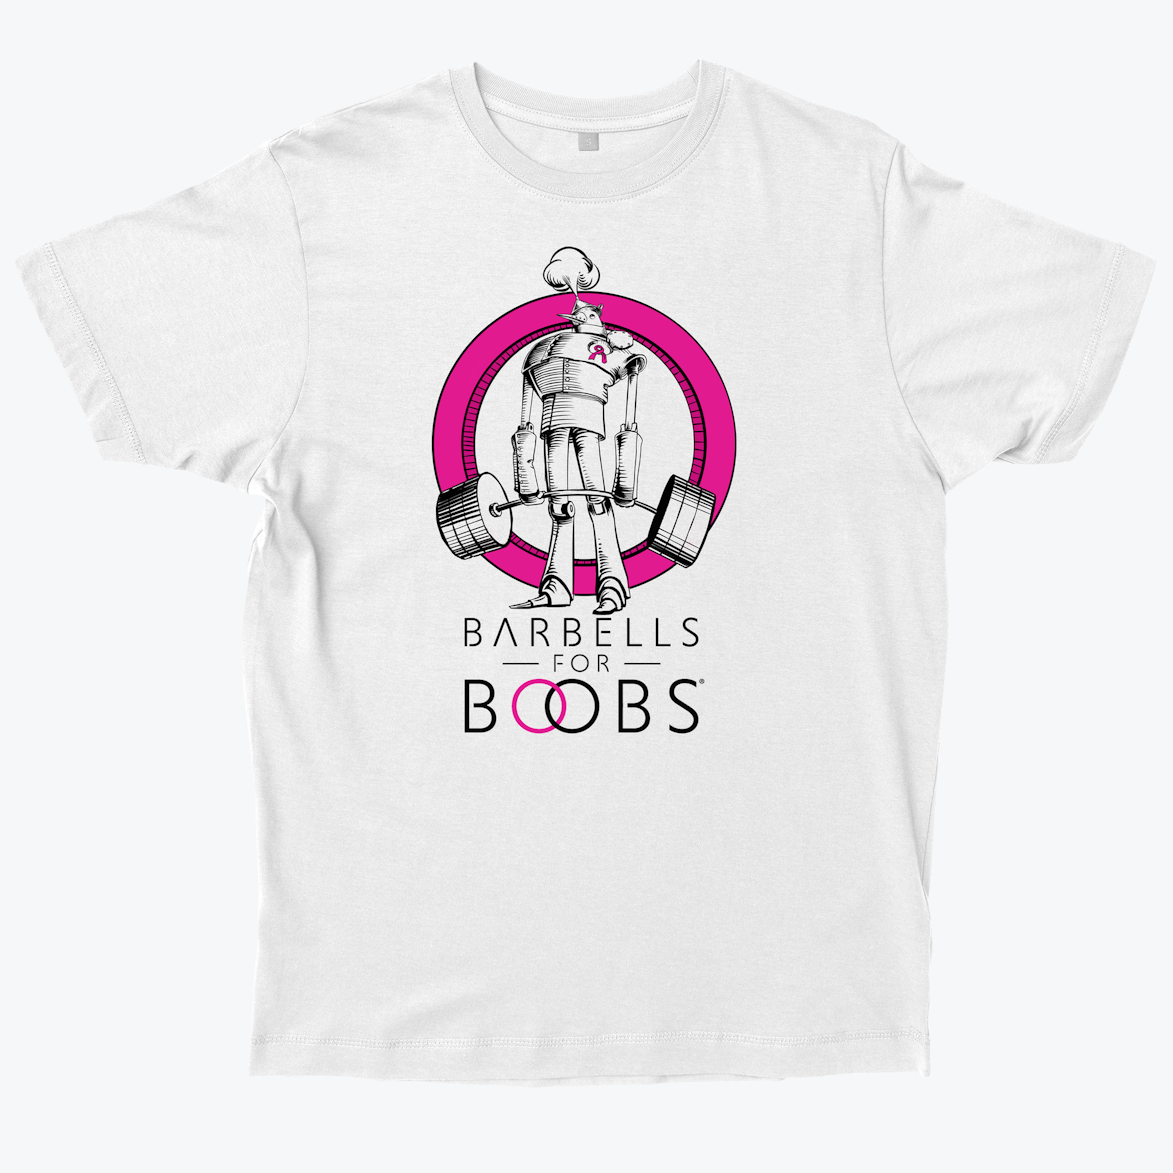 Barbells for boobs